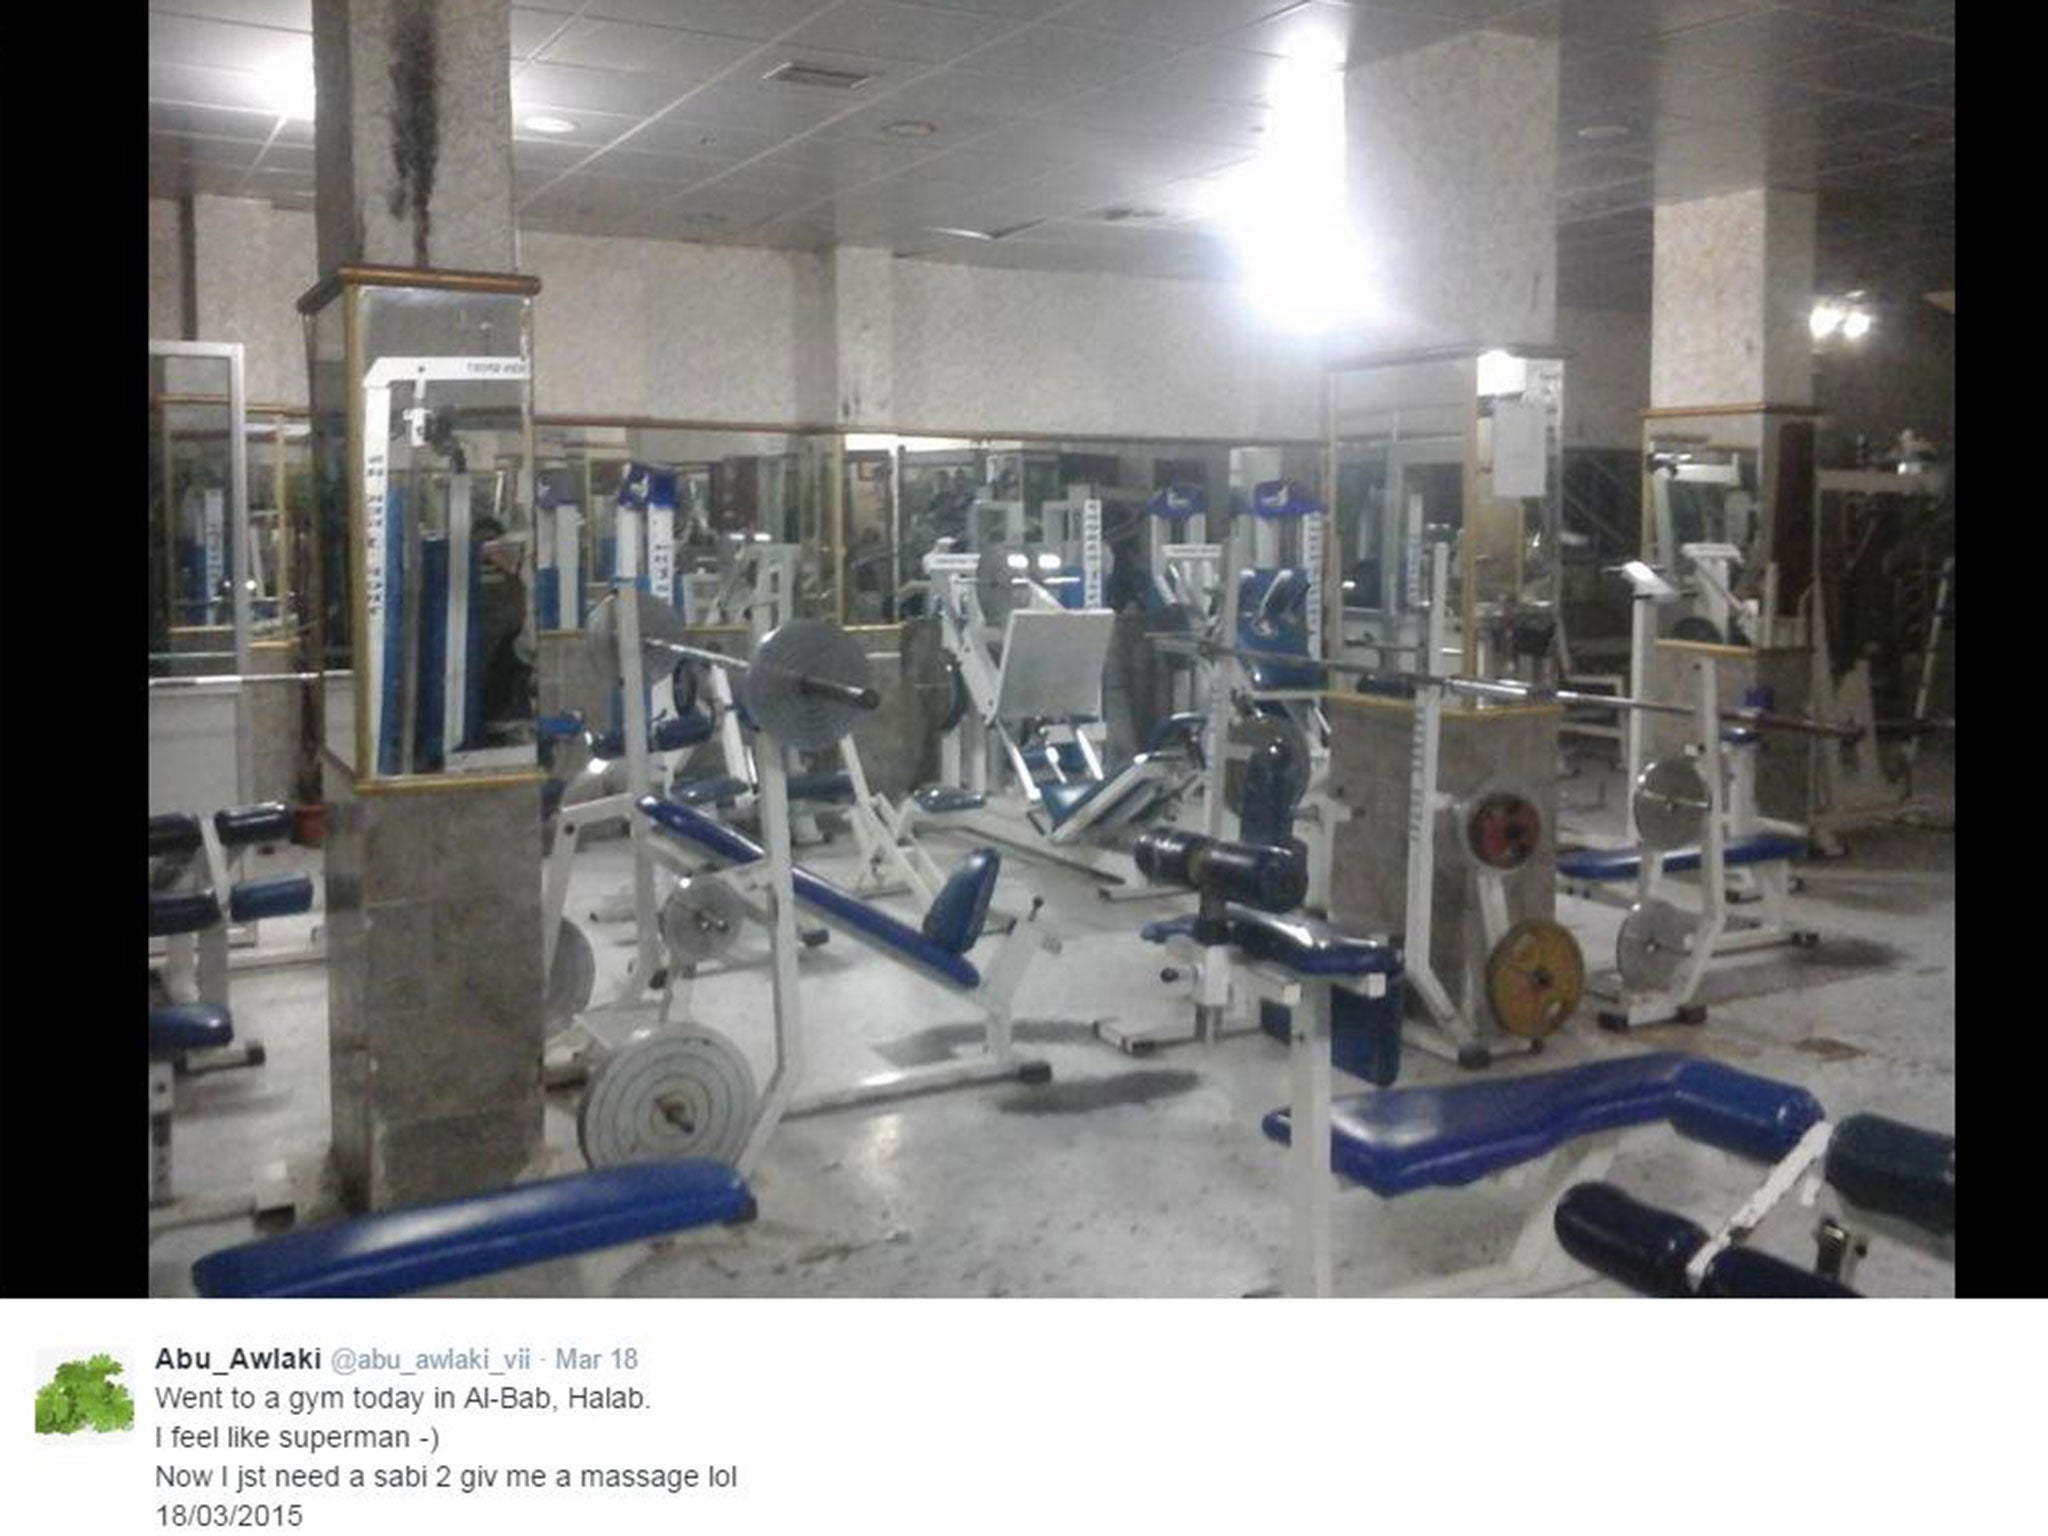 A gym apparently in Aleppo